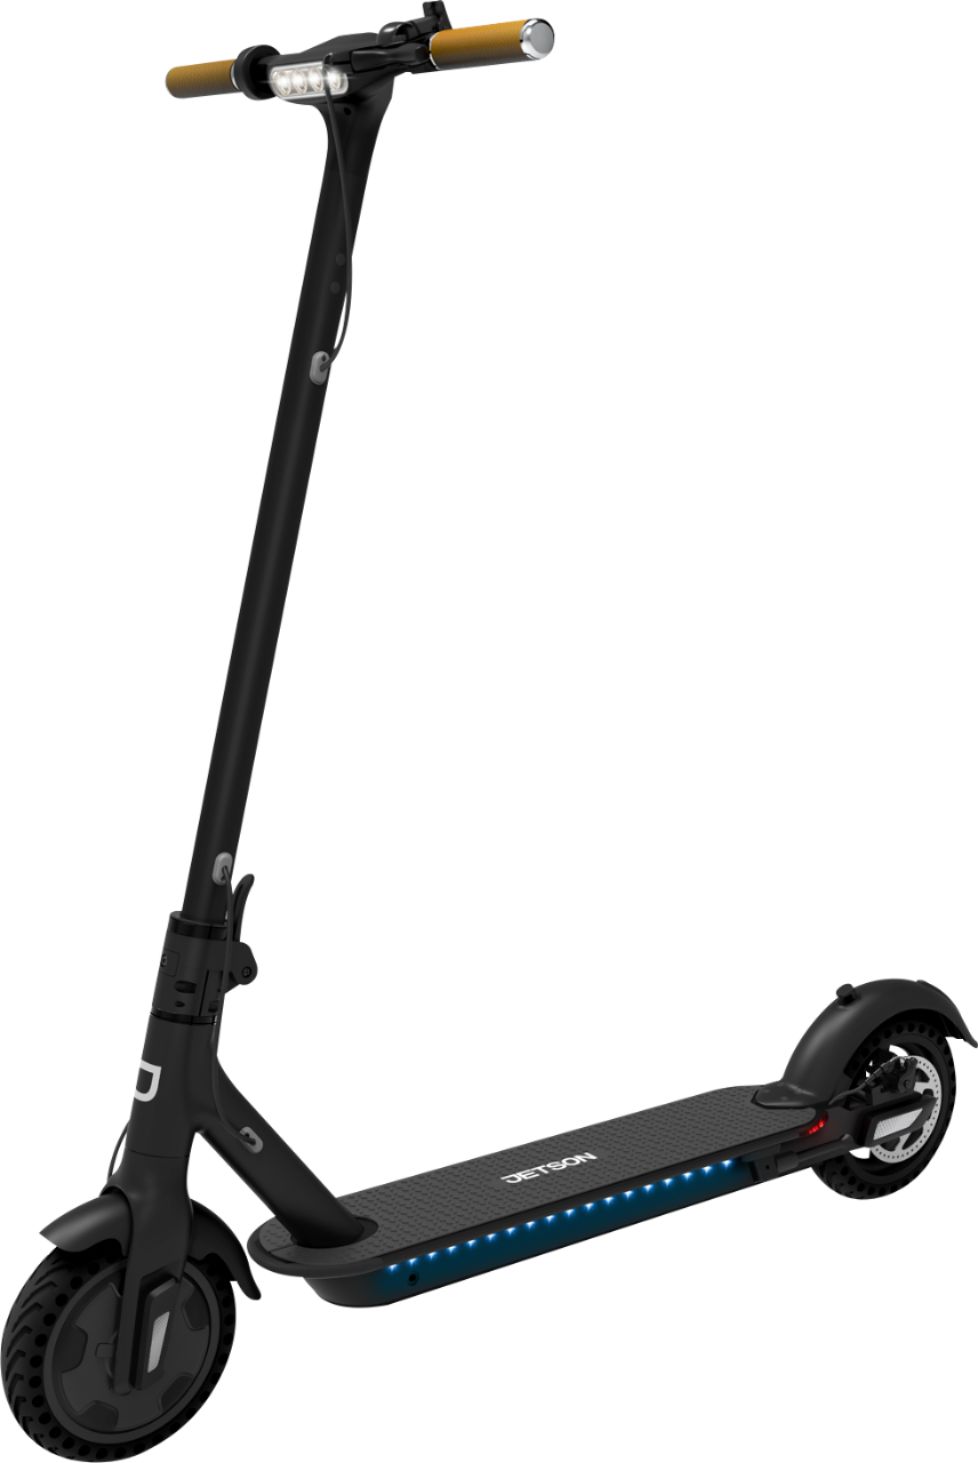 Jetson - Quest Foldable Electric Scooter w/18 mi Max Operating Range & 15 mph Max Speed - Black